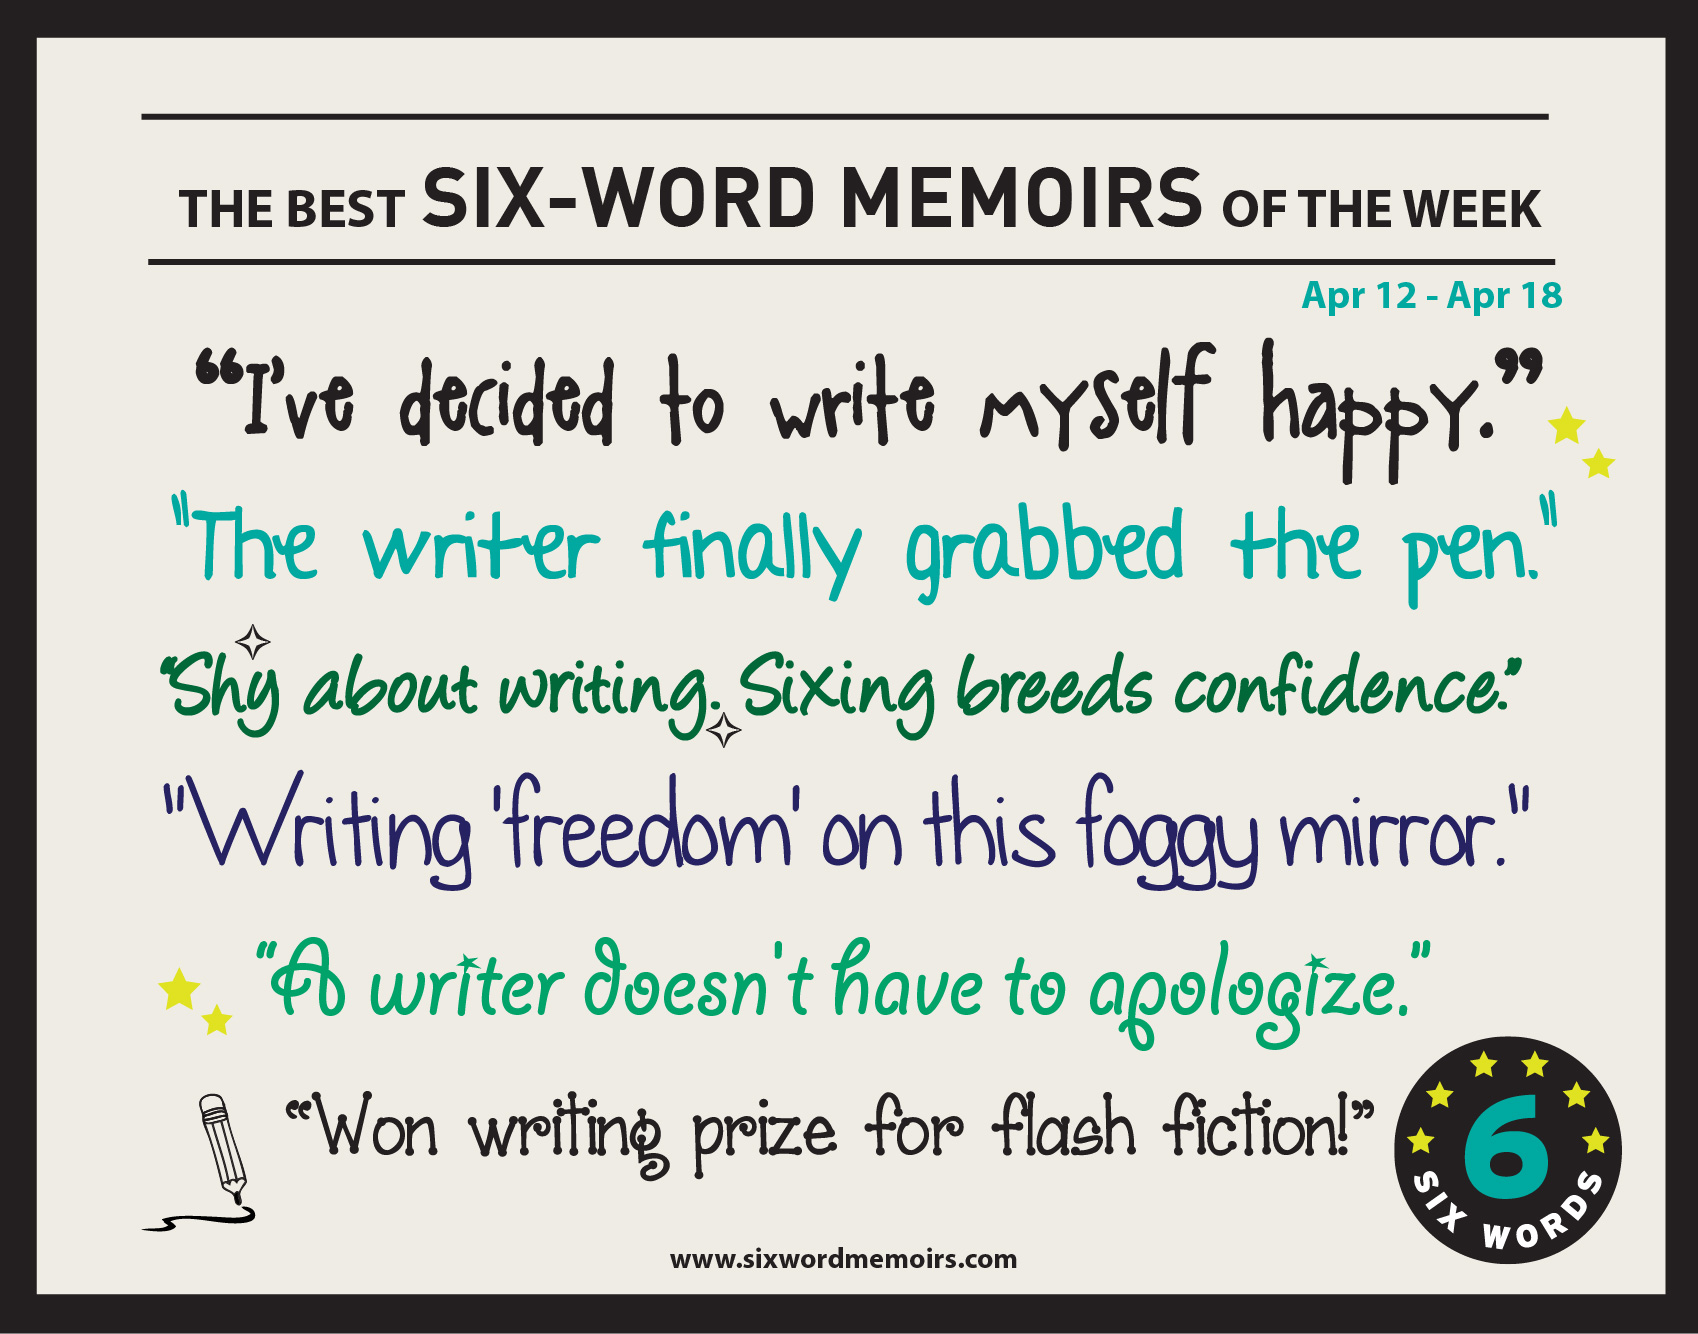 Shy about writing. Sixing breeds confidence.” Best Six-Word